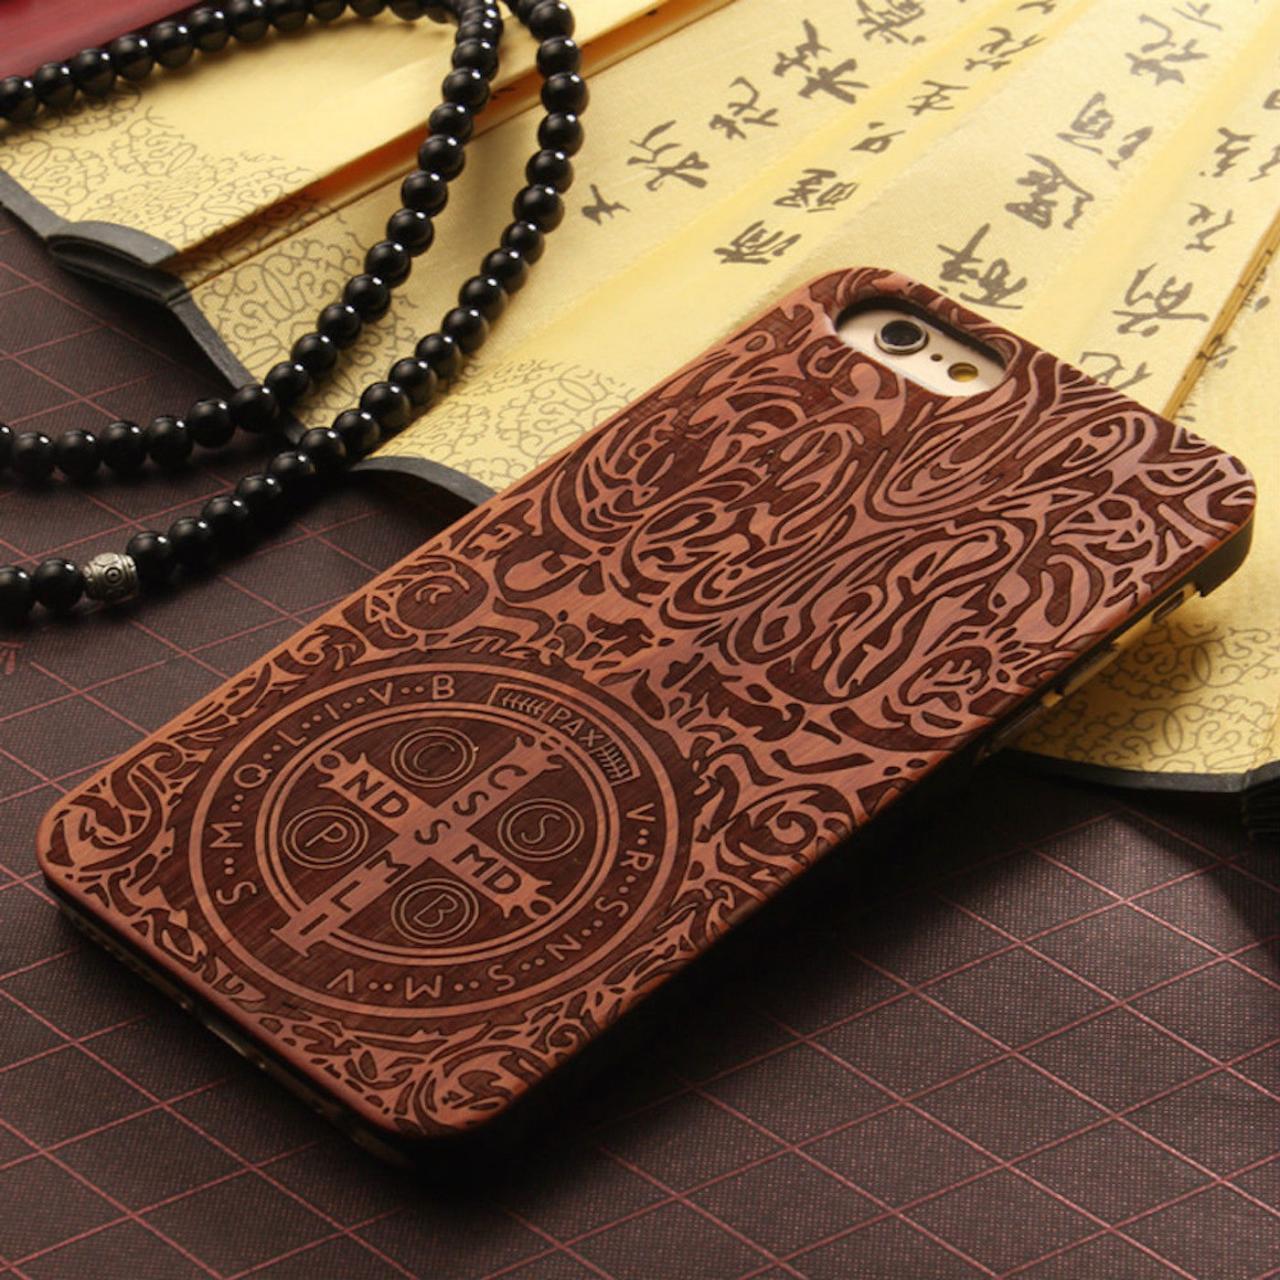 Luxury Natural Wood Wooden Bamboo Hard Cover Phone Case For Apple Iphone 6/6s/plus, Constance Dante